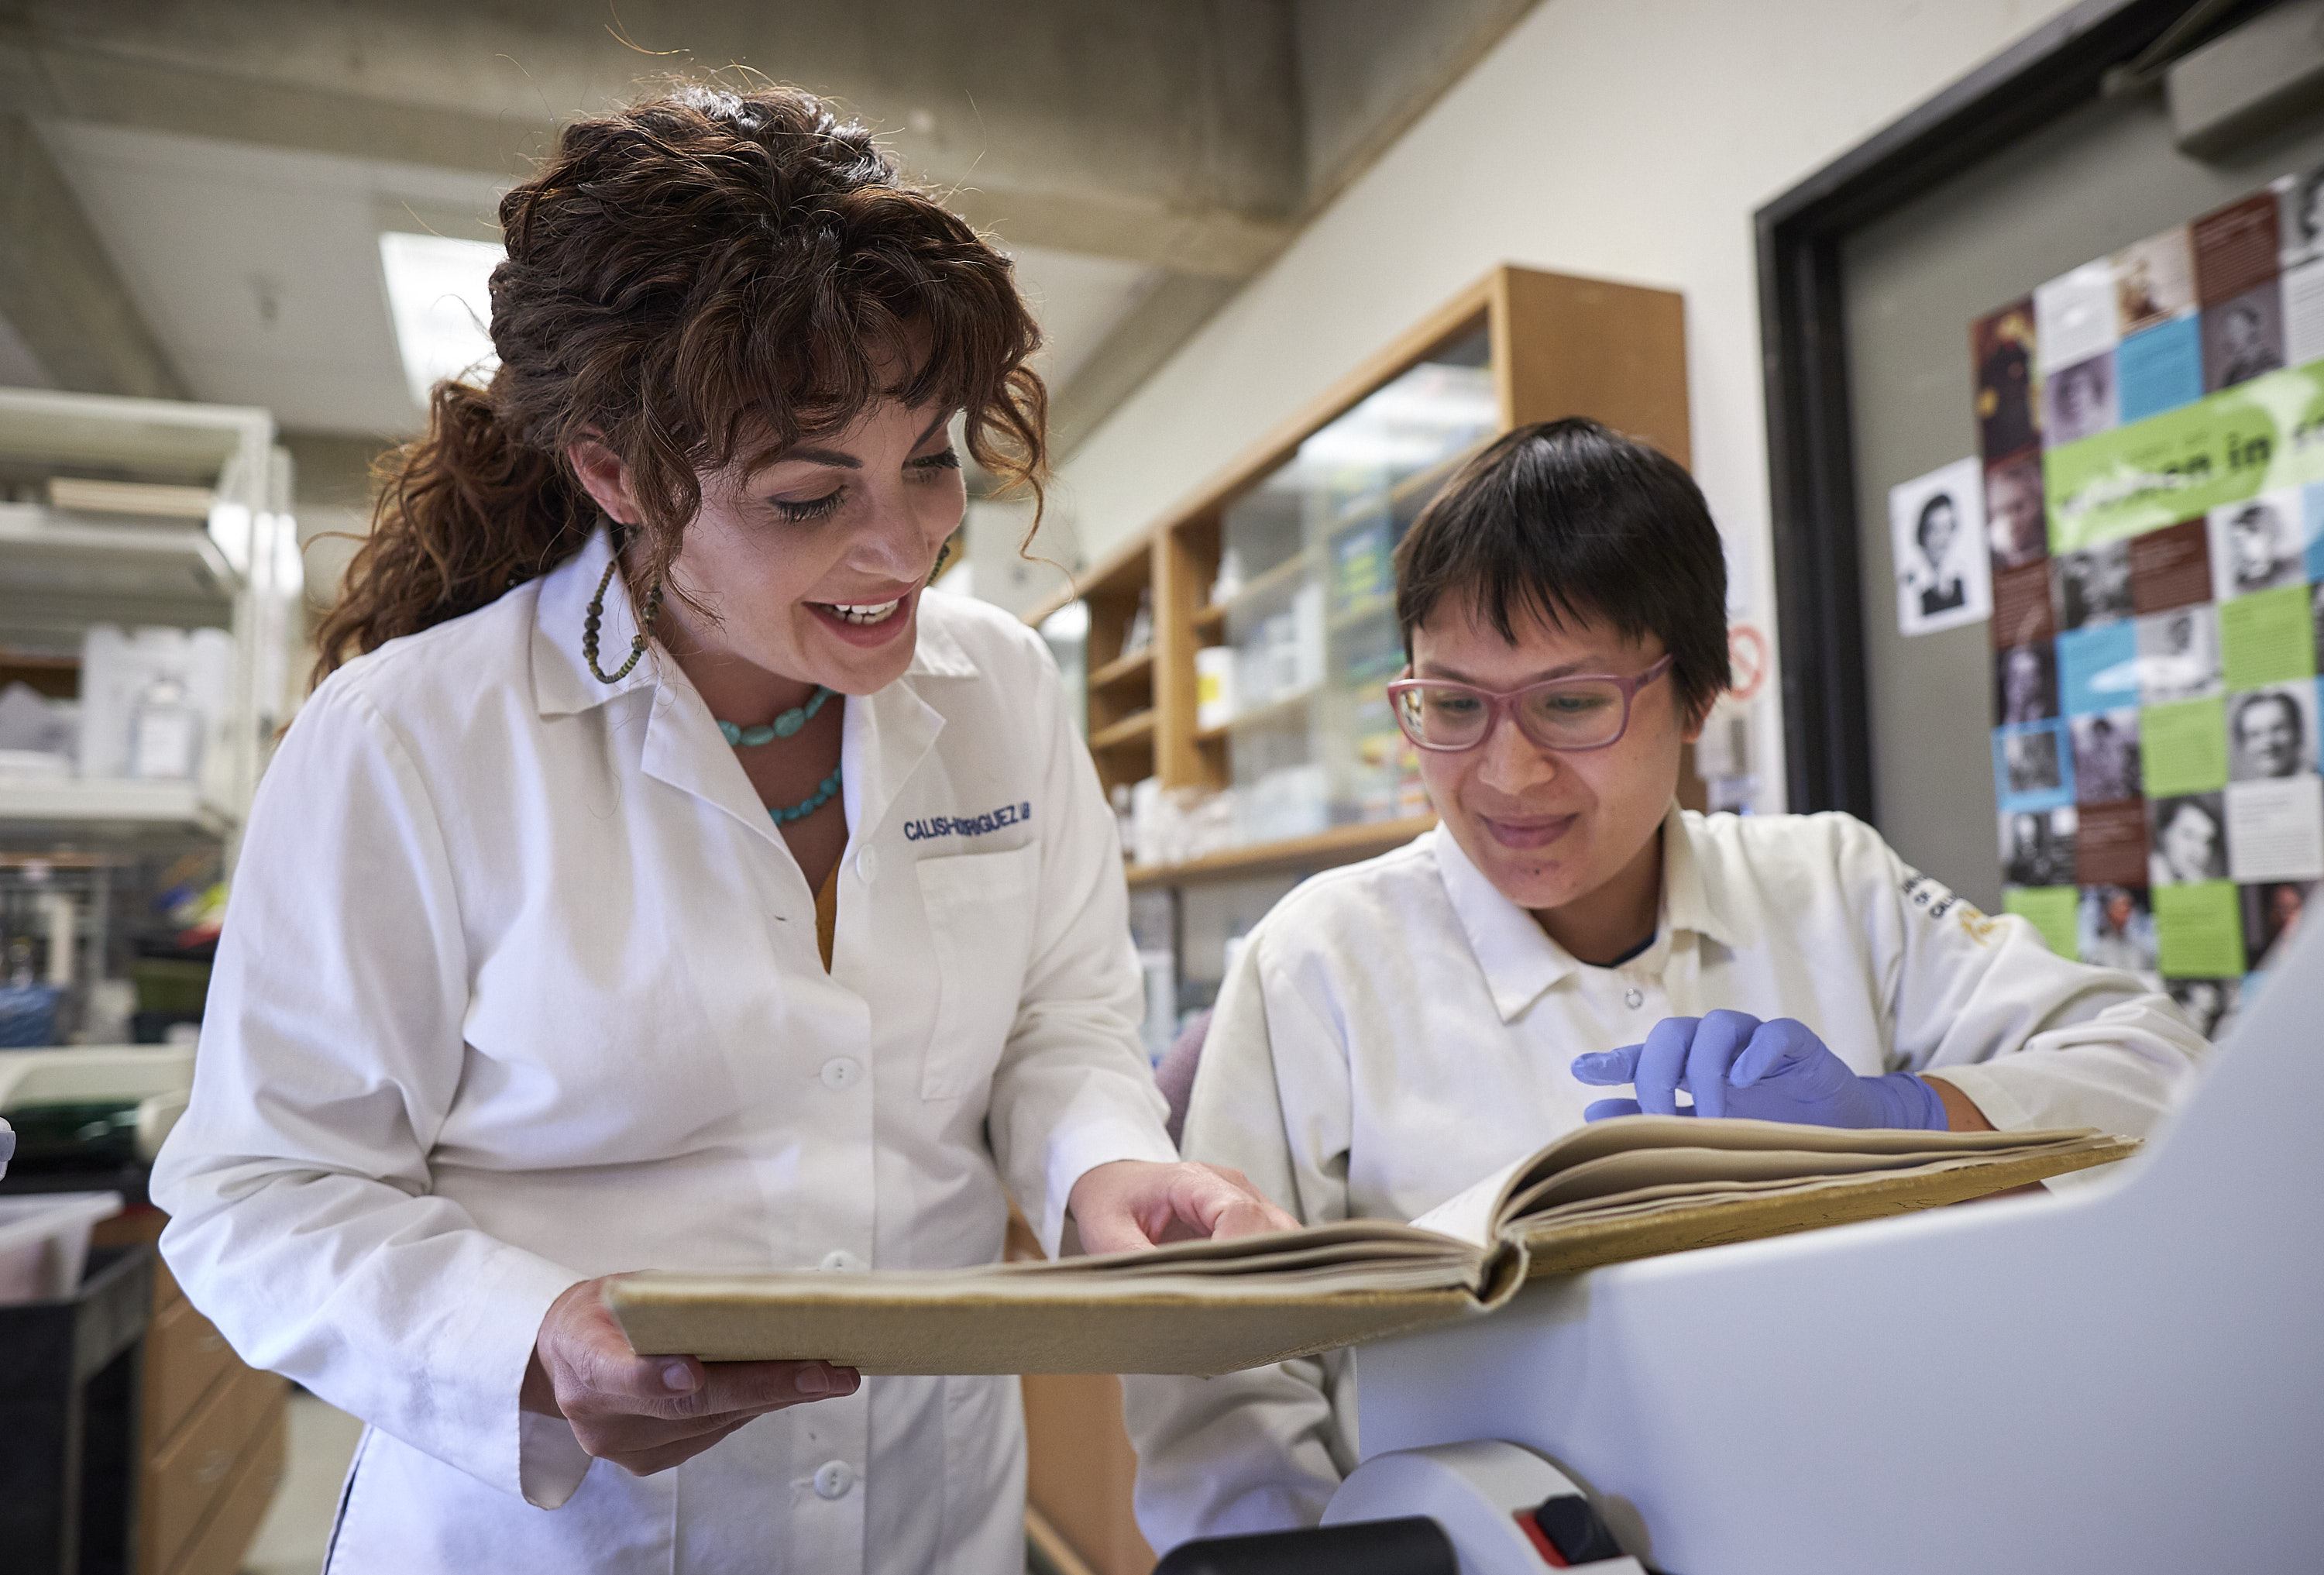 Two women in a lab wearing white lab coats look at a book together